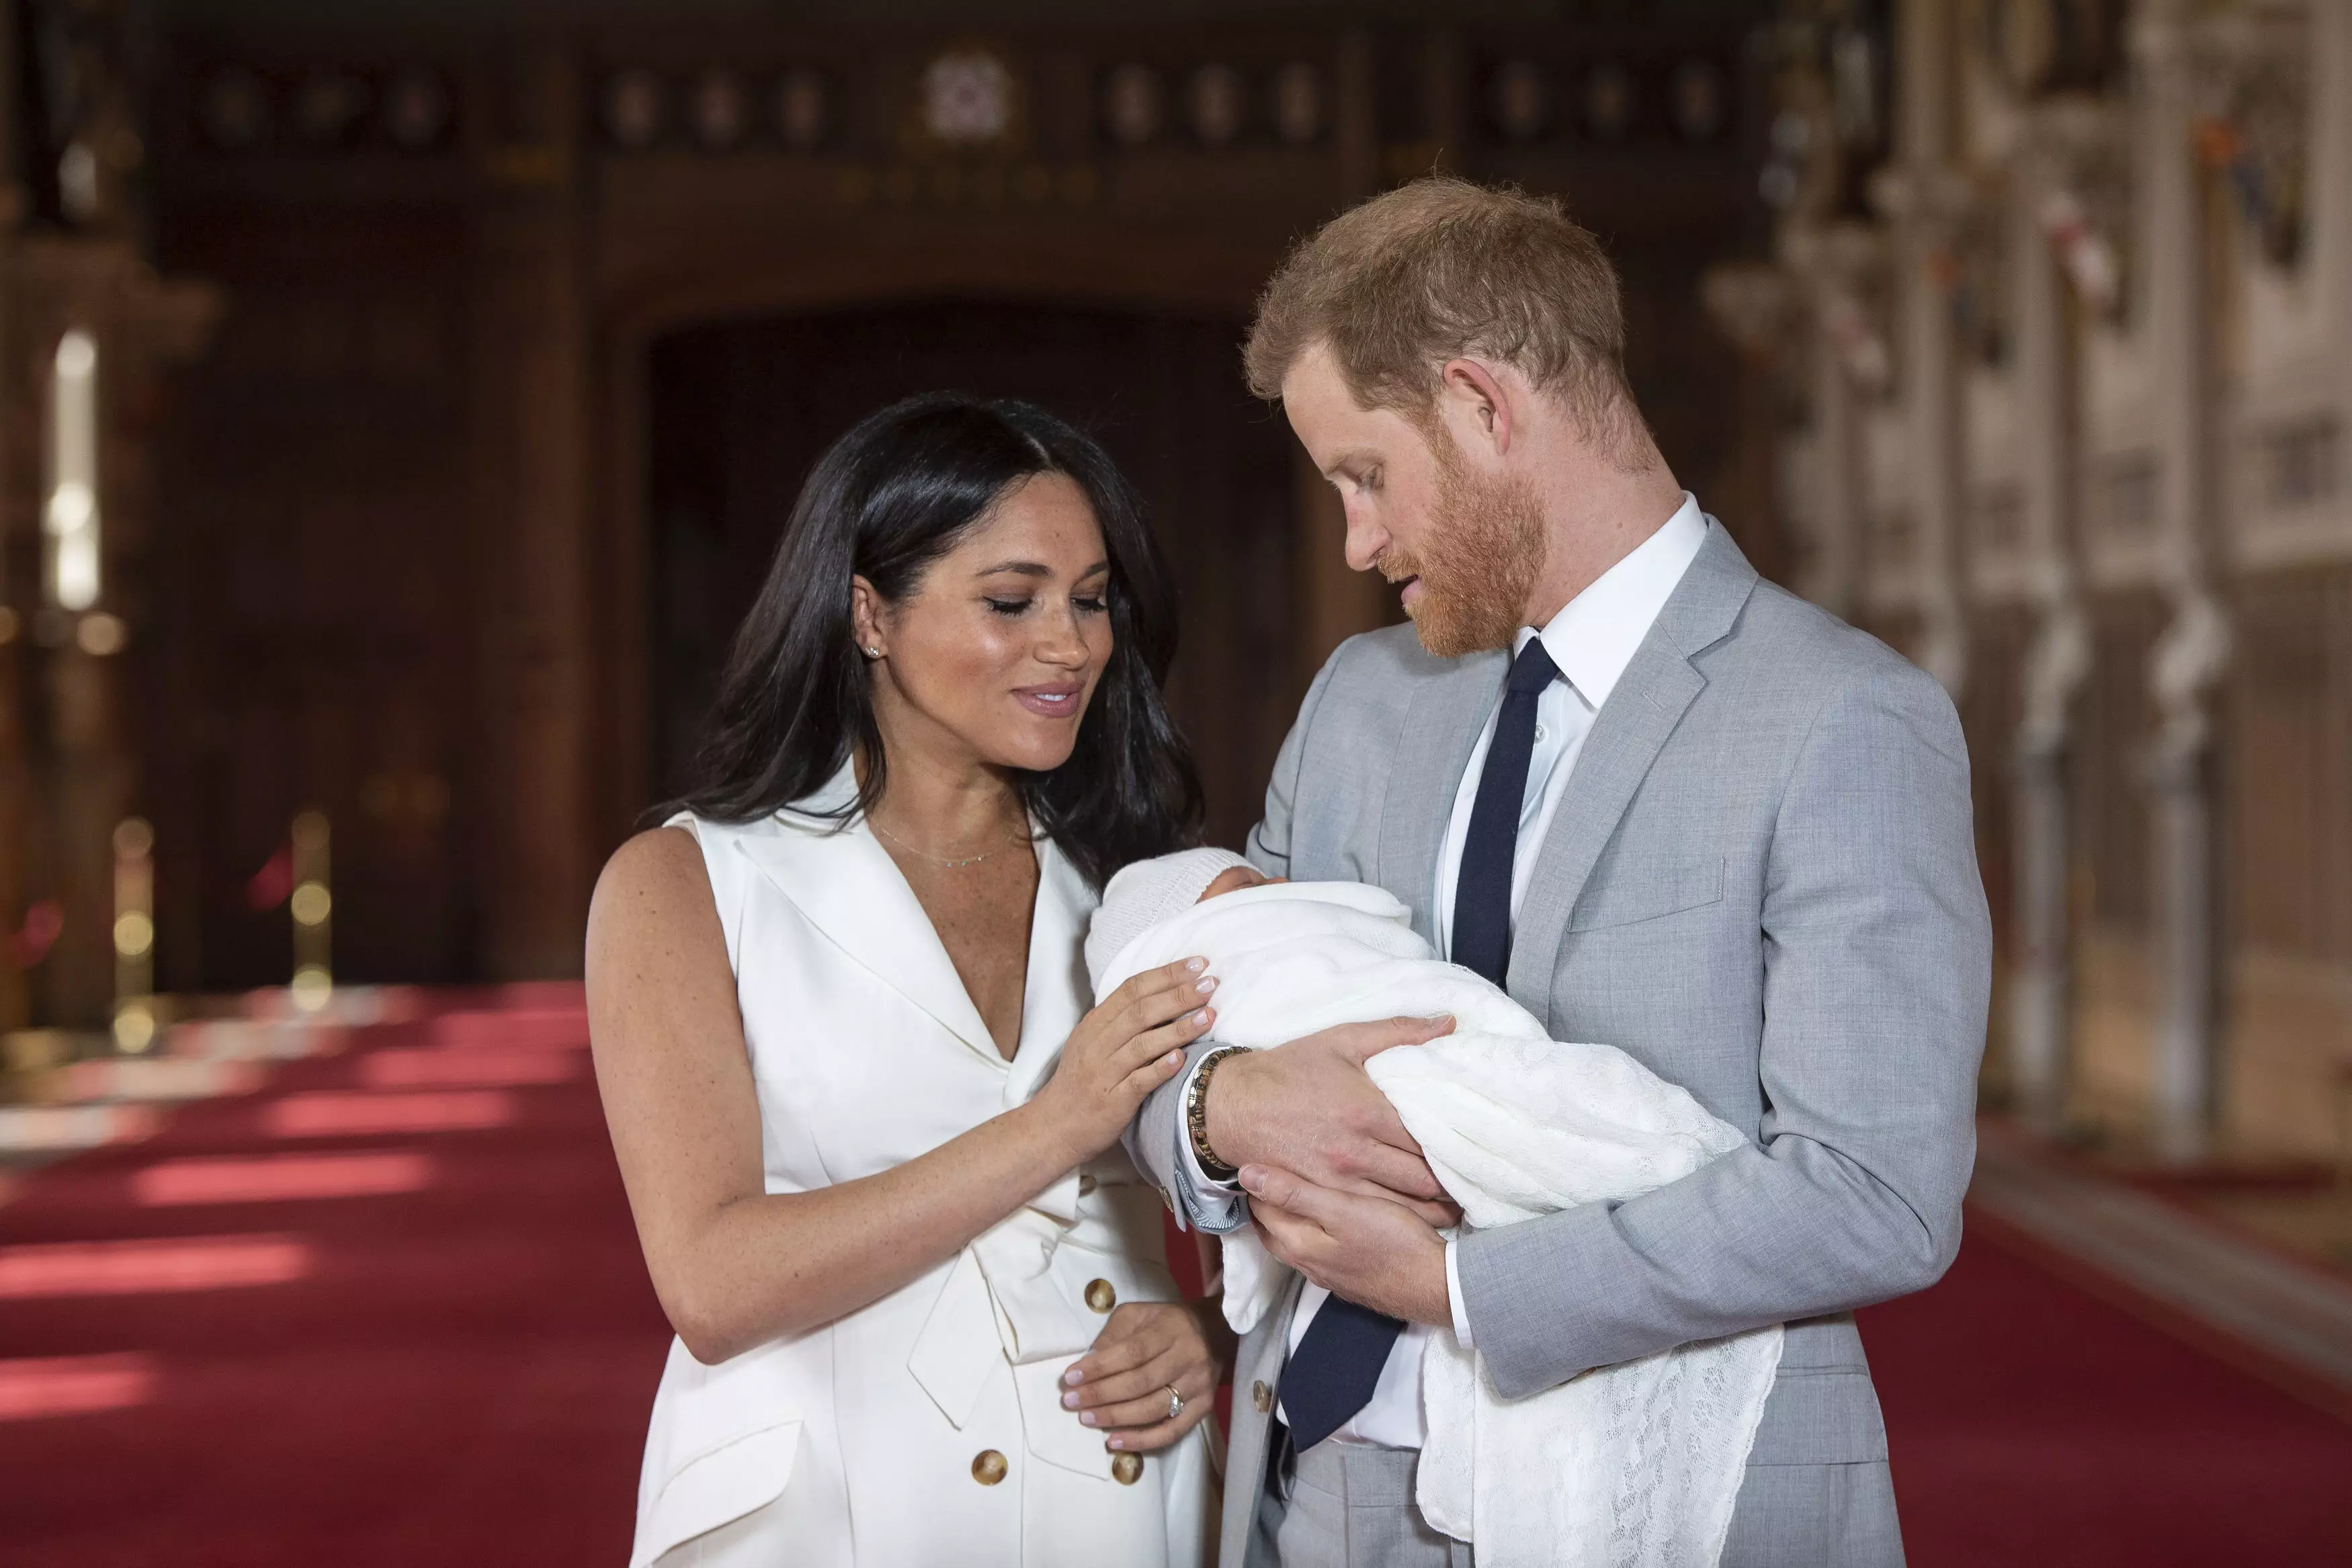 Meghan and Harry share baby Archie (